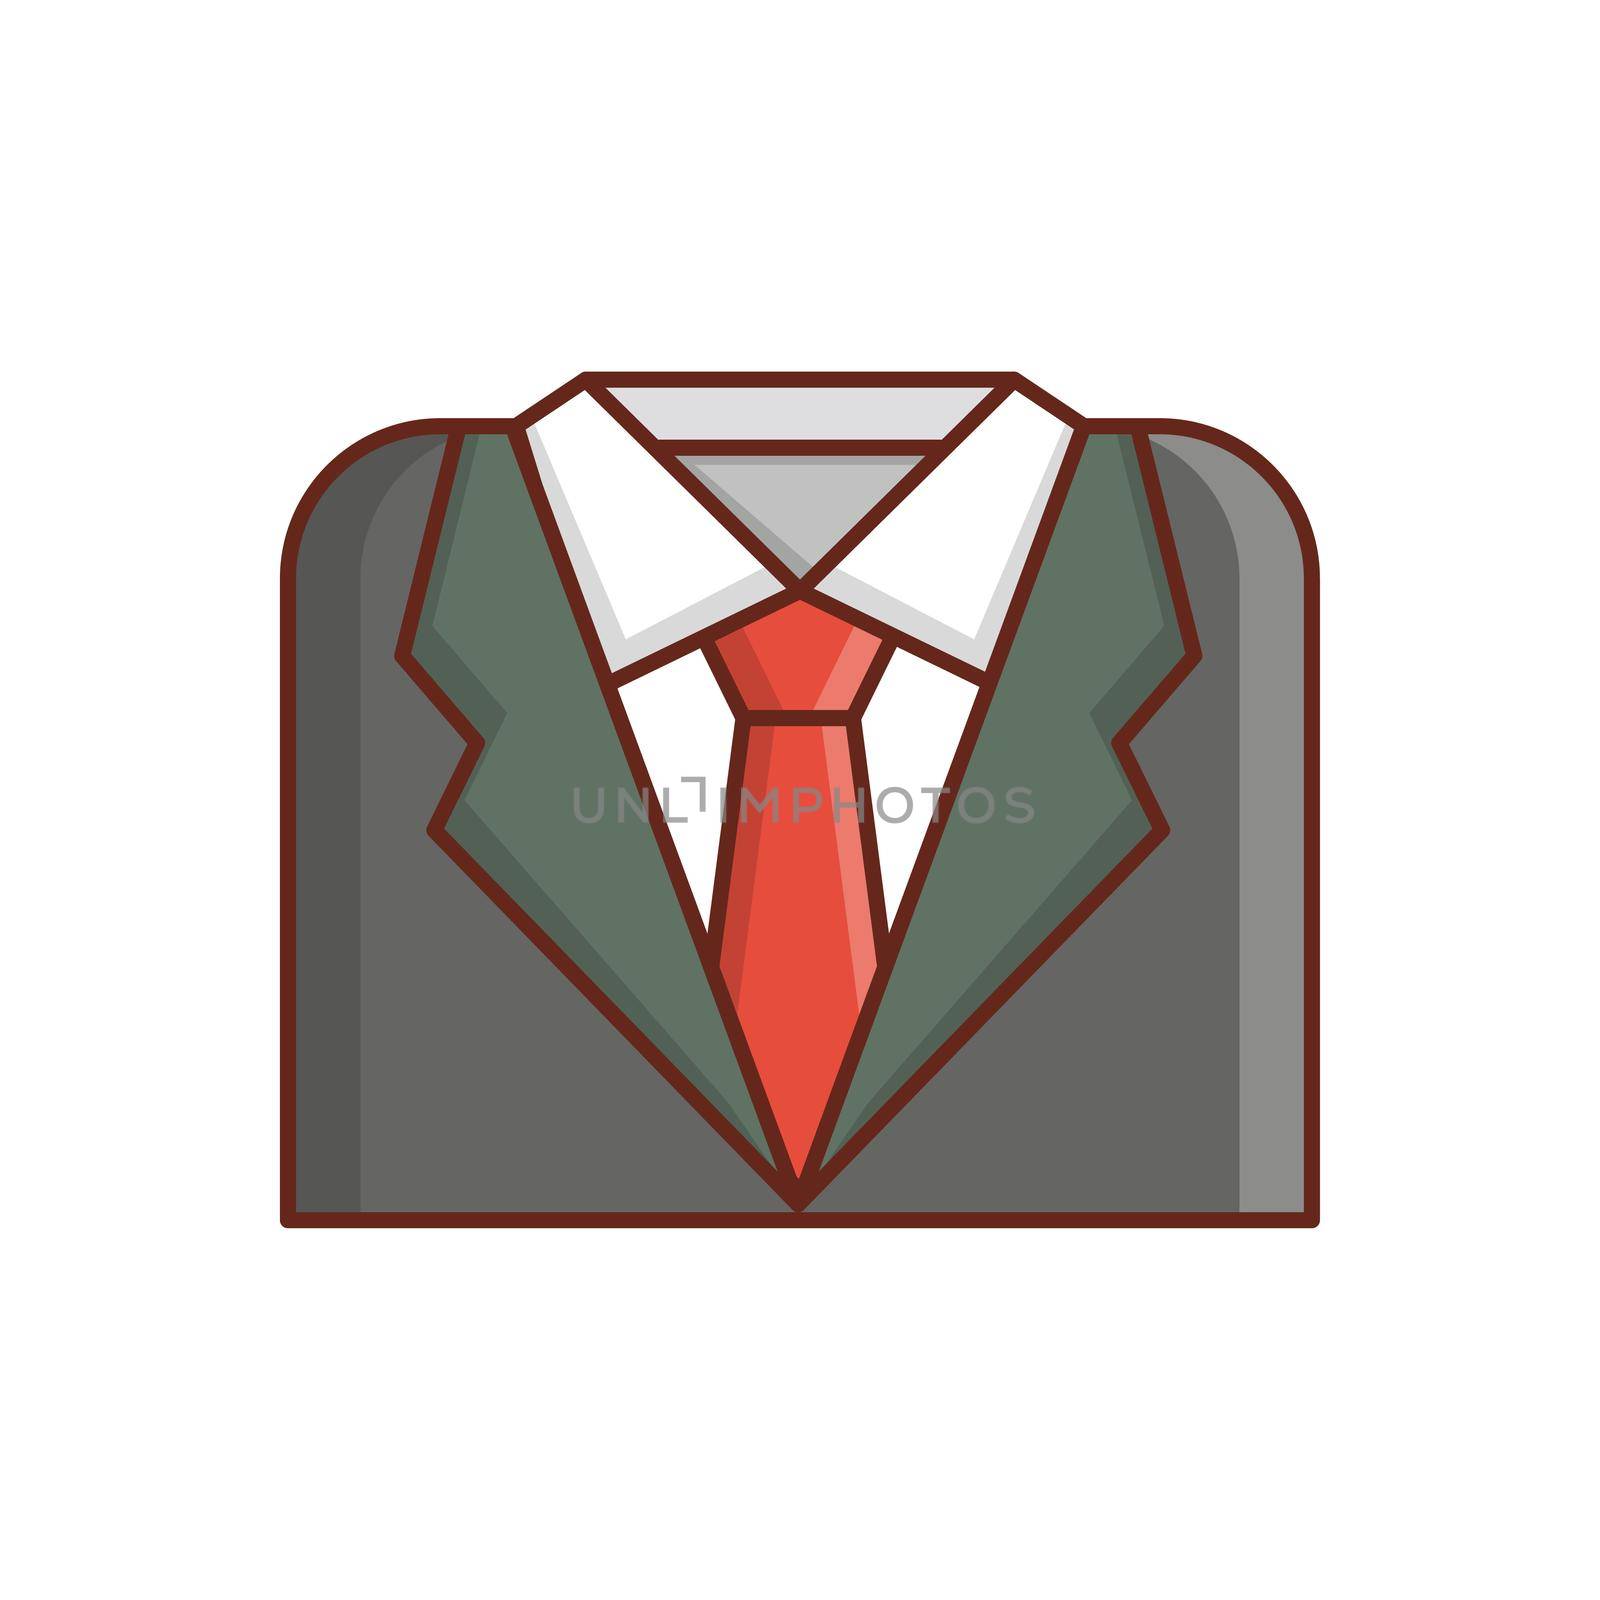 suit by FlaticonsDesign